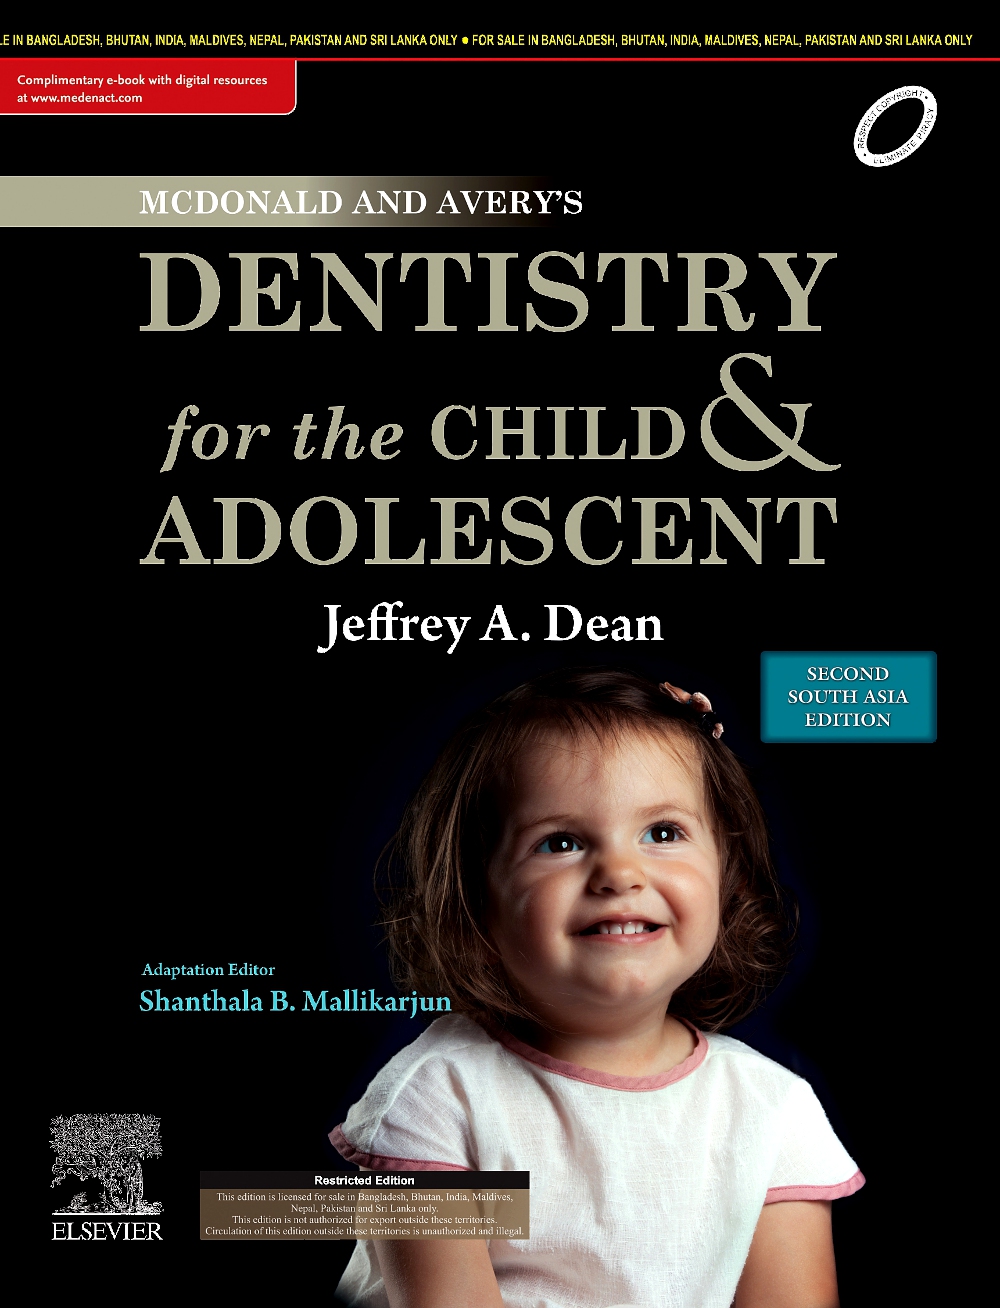 mcdonald-and-avery-dentistry-for-child-and-adolescent-second-south-asia-edition